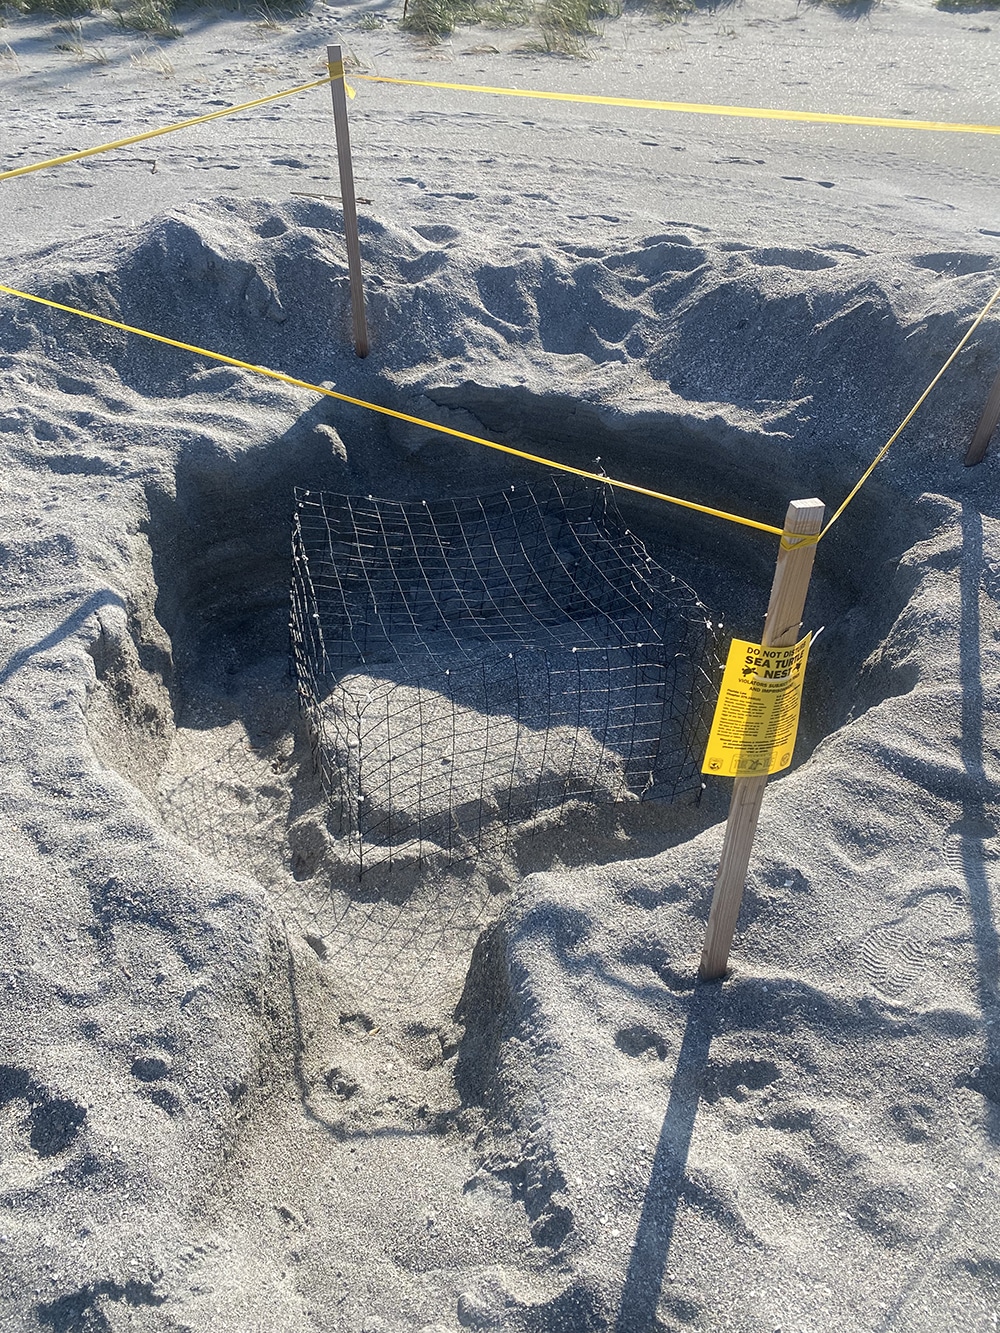 sea turtle nest that had been buried under sand